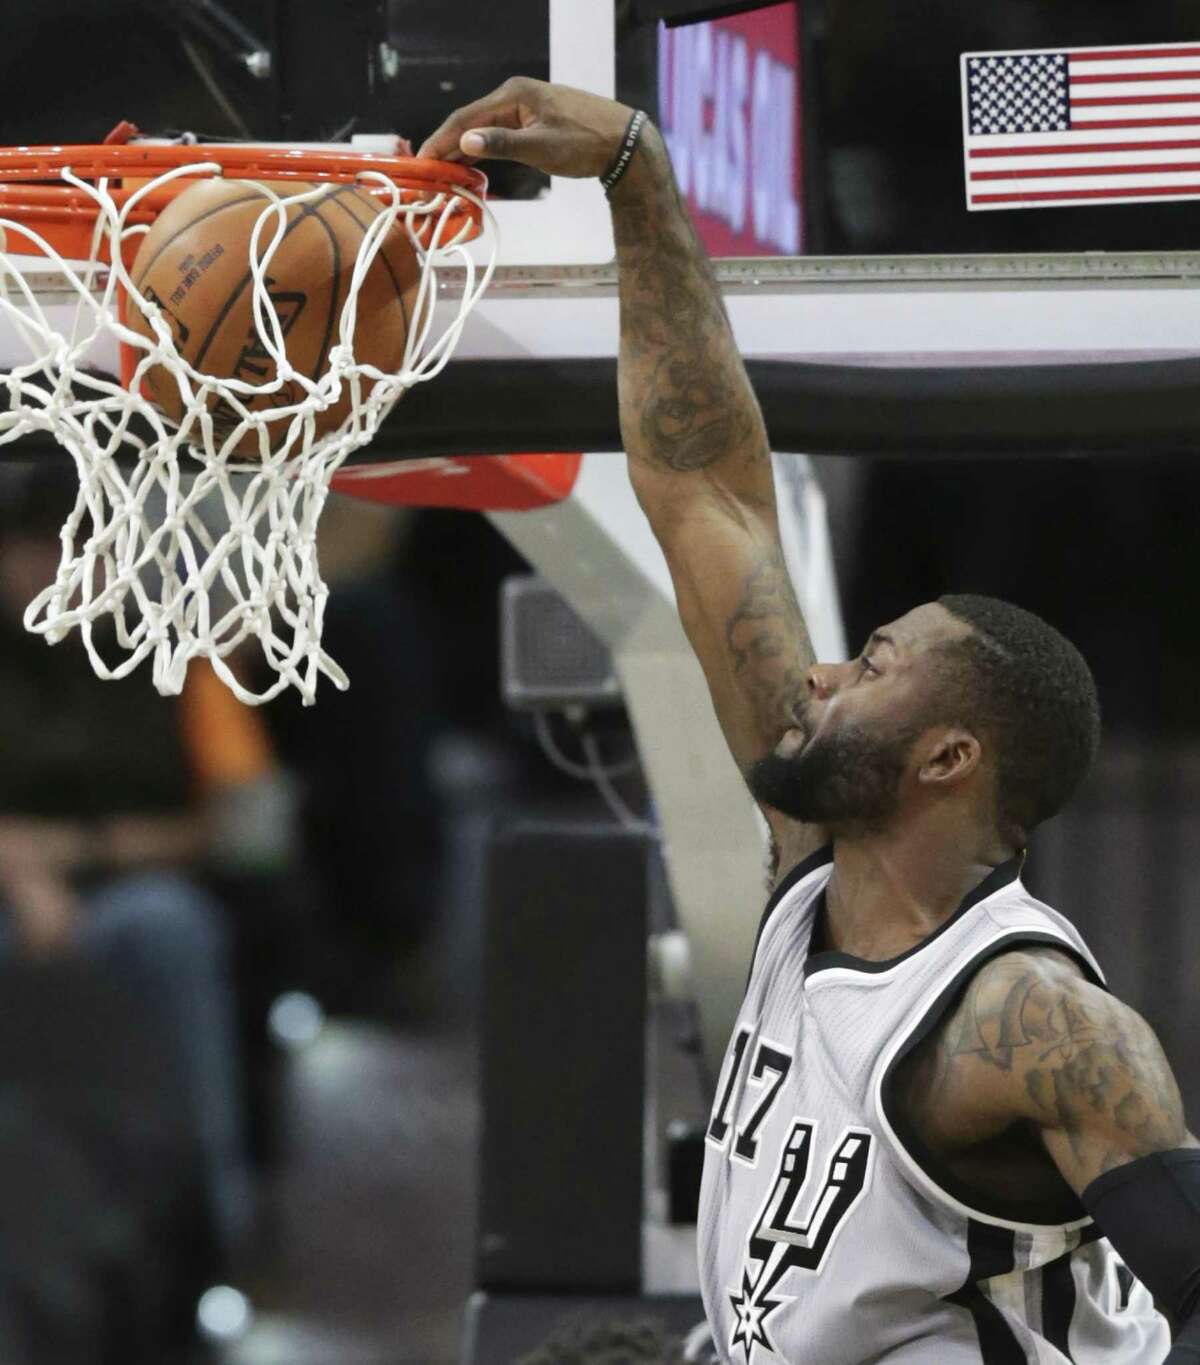 Jonathon Simmons slams one home in the second half as the Spurs host the Trail Blazers at the AT&T Center on December 30, 2016.